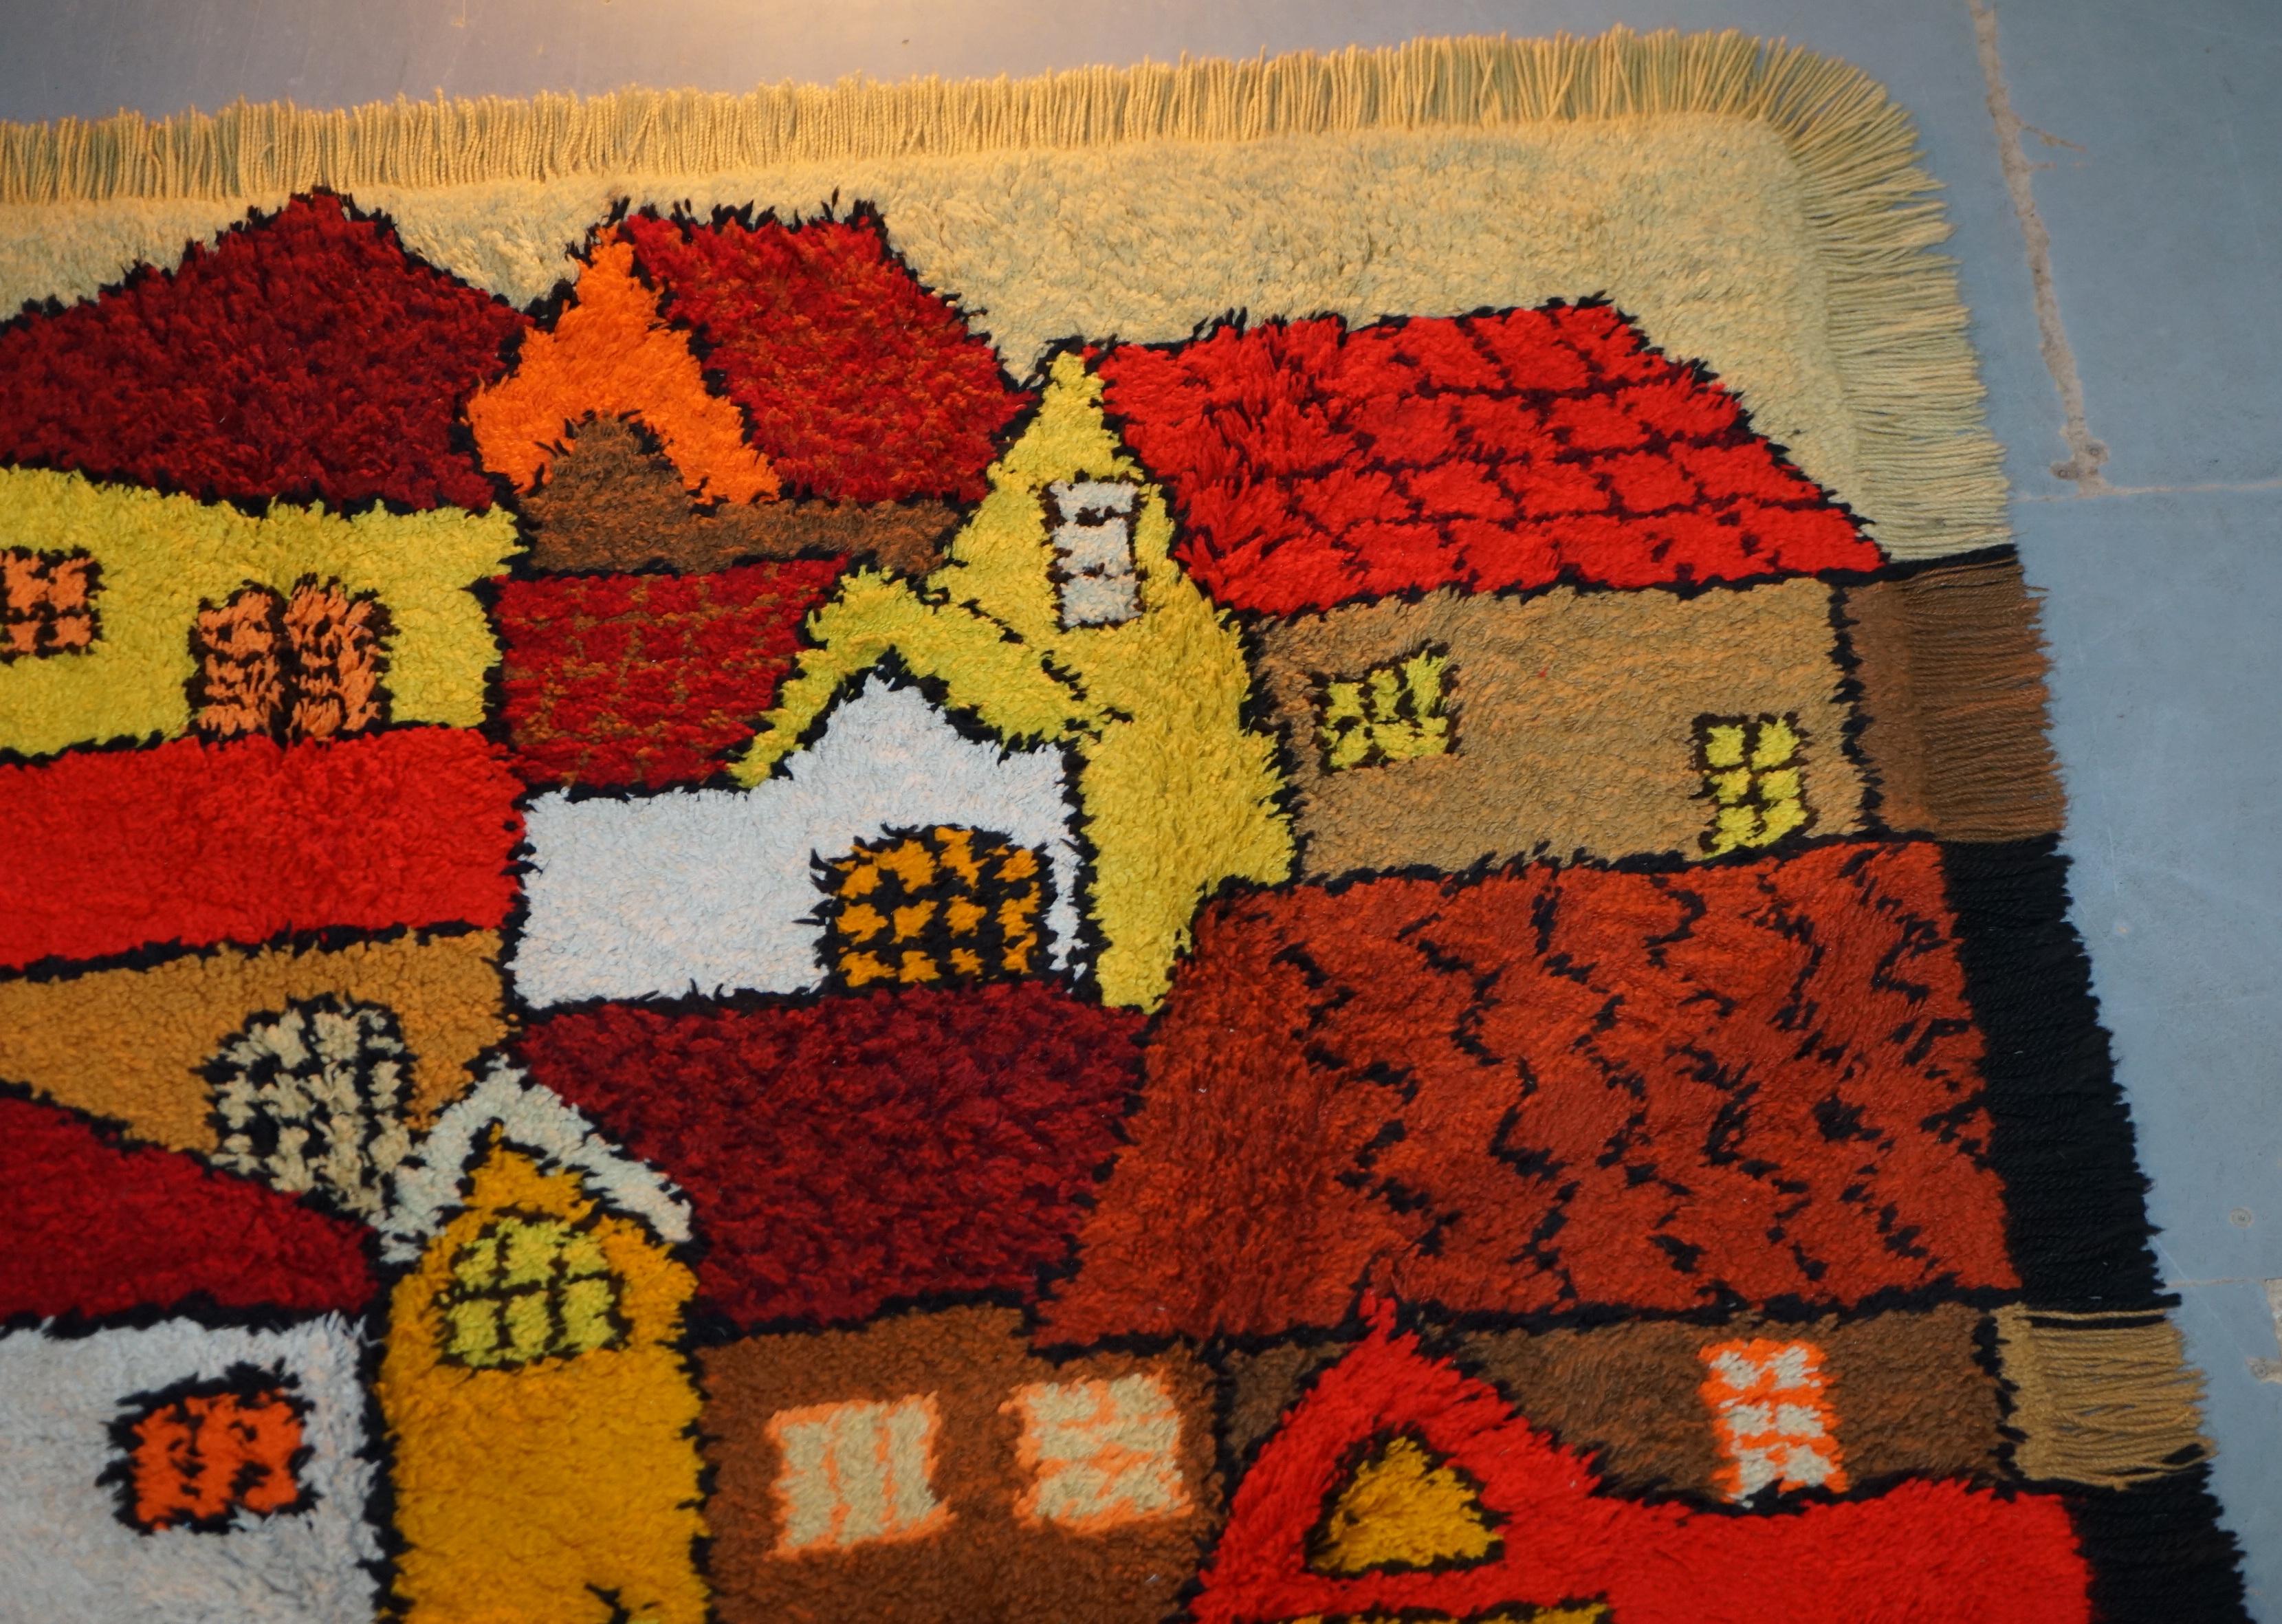 Stunning Large Shag Pile Rug Depicting Houses in the Style of L.S Lowry For Sale 1